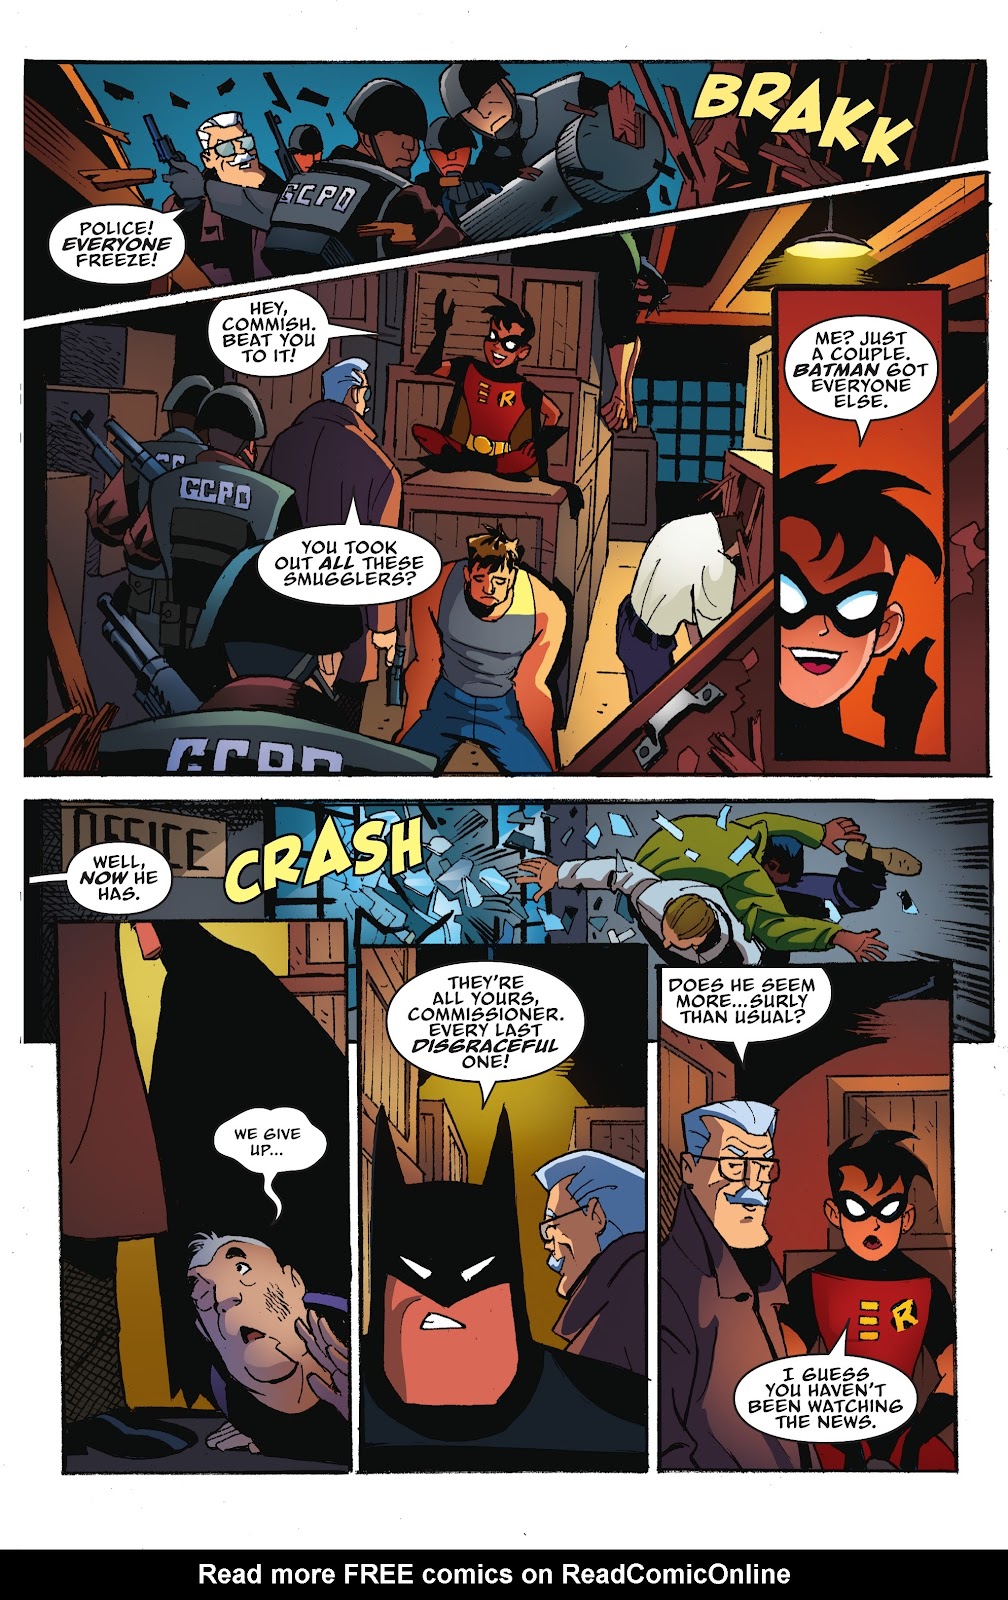 Batman: The Adventures Continue: Season Two issue 6 - Page 3